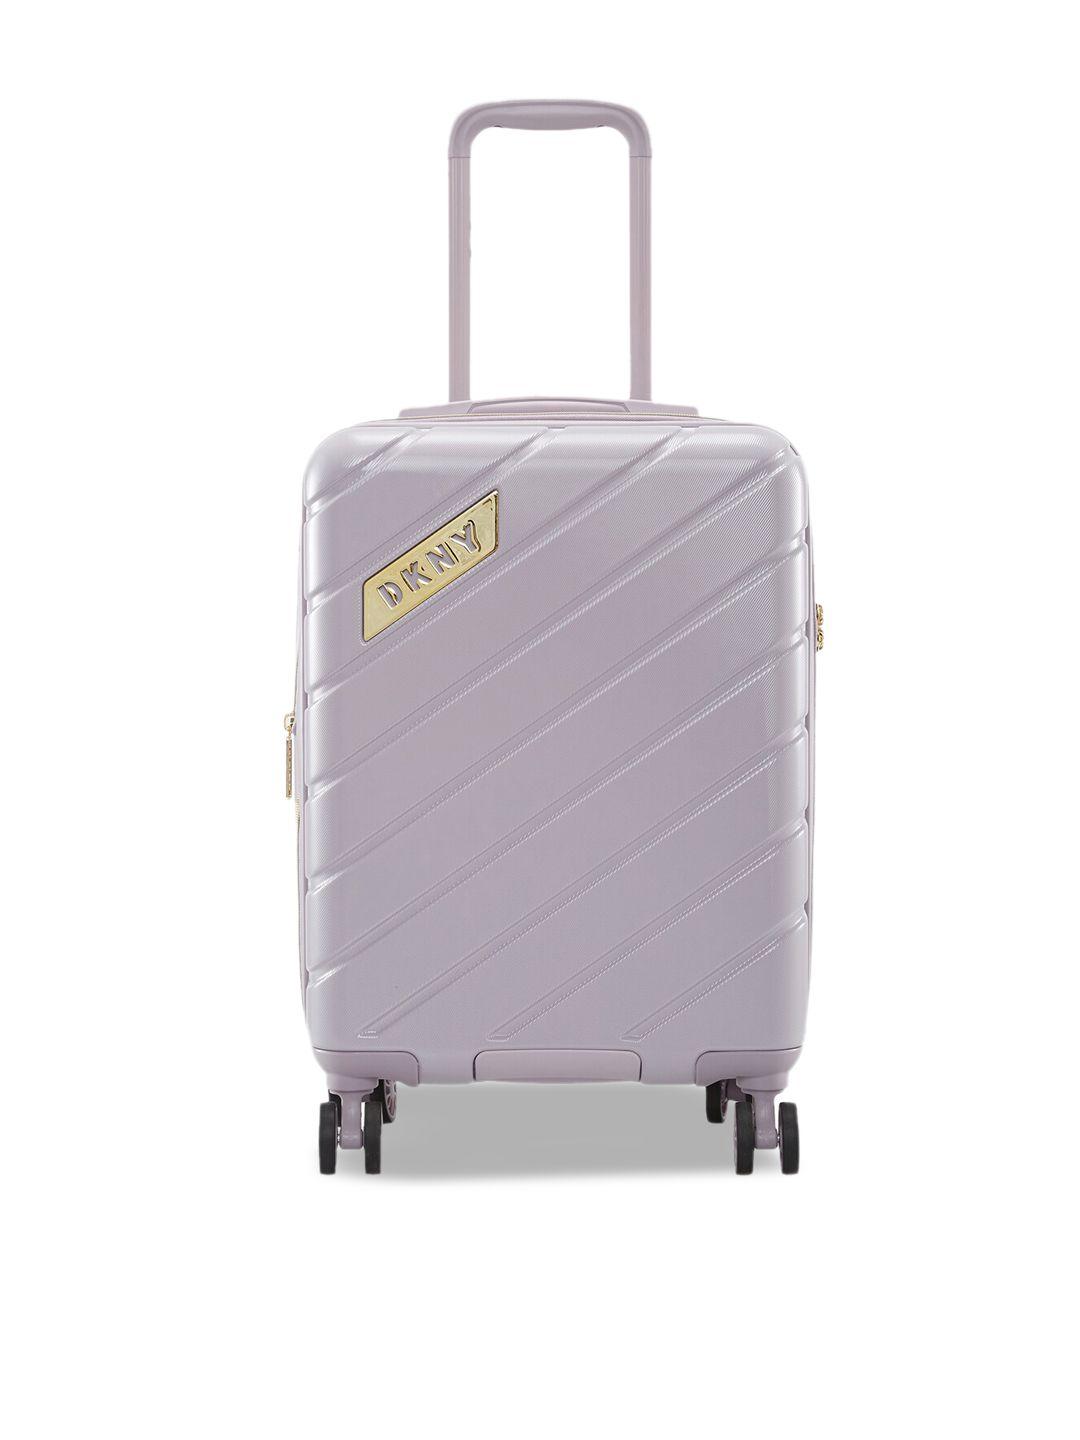 dkny bias textured hard-sided small abs trolley suitcase